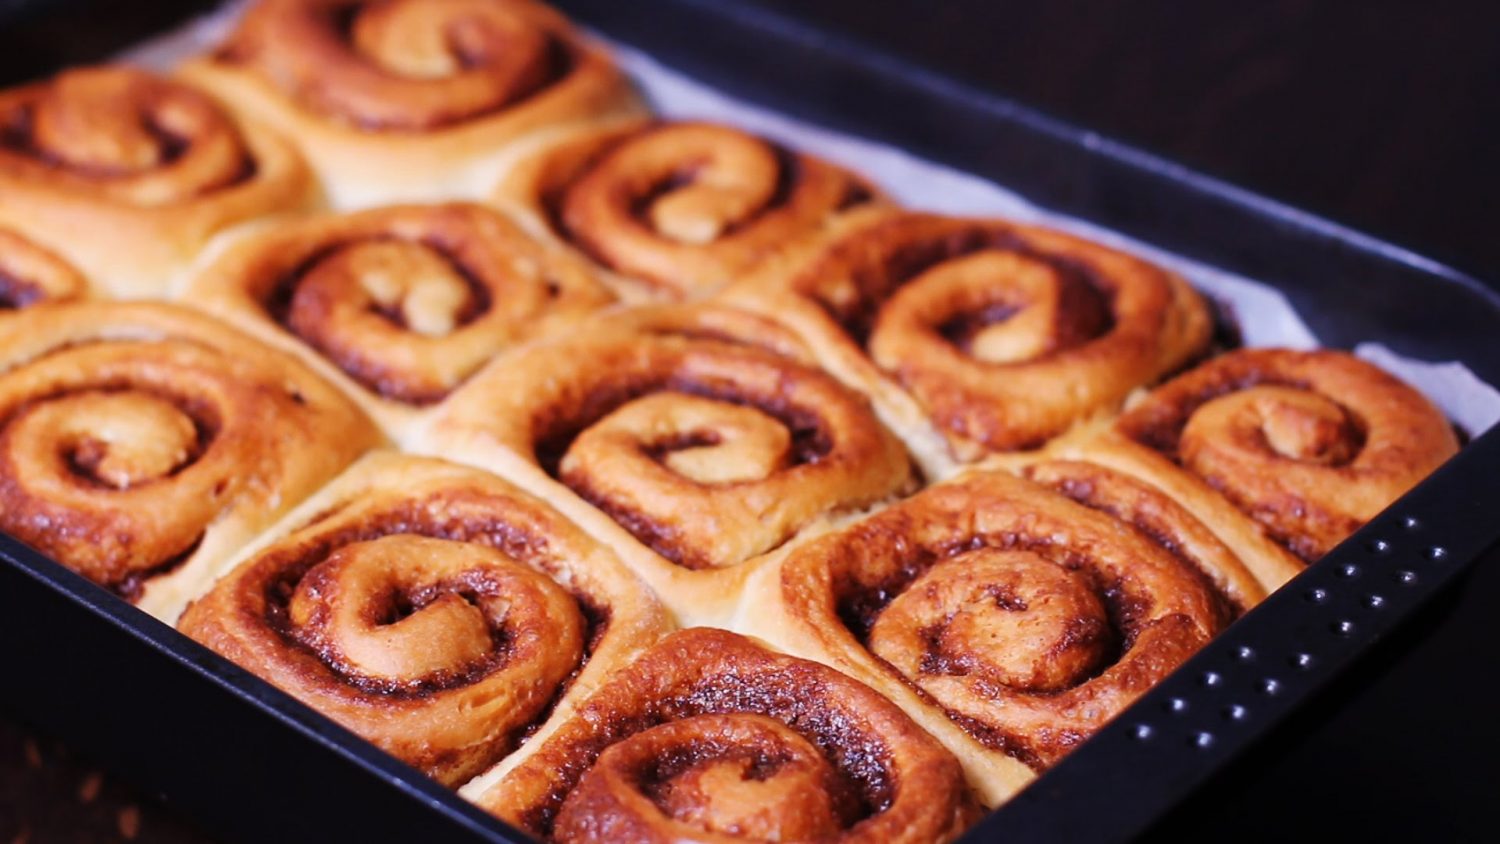 🥨 Pick Some Baked Goods and We’ll Reveal a Deep Truth About You cinnamon rolls1